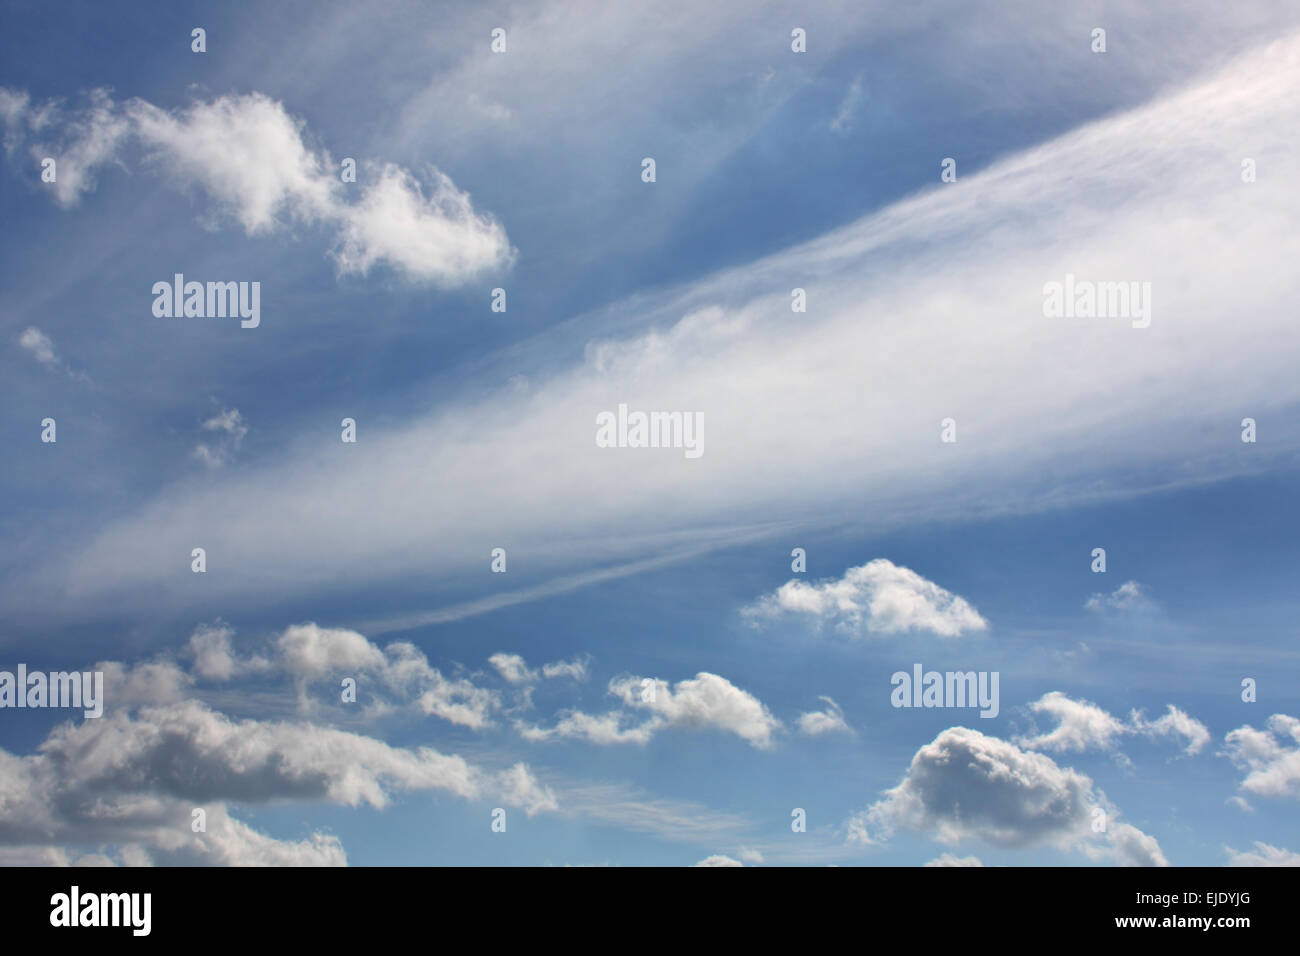 Gorgeous blue sky with spectacular cloud formation Stock Photo